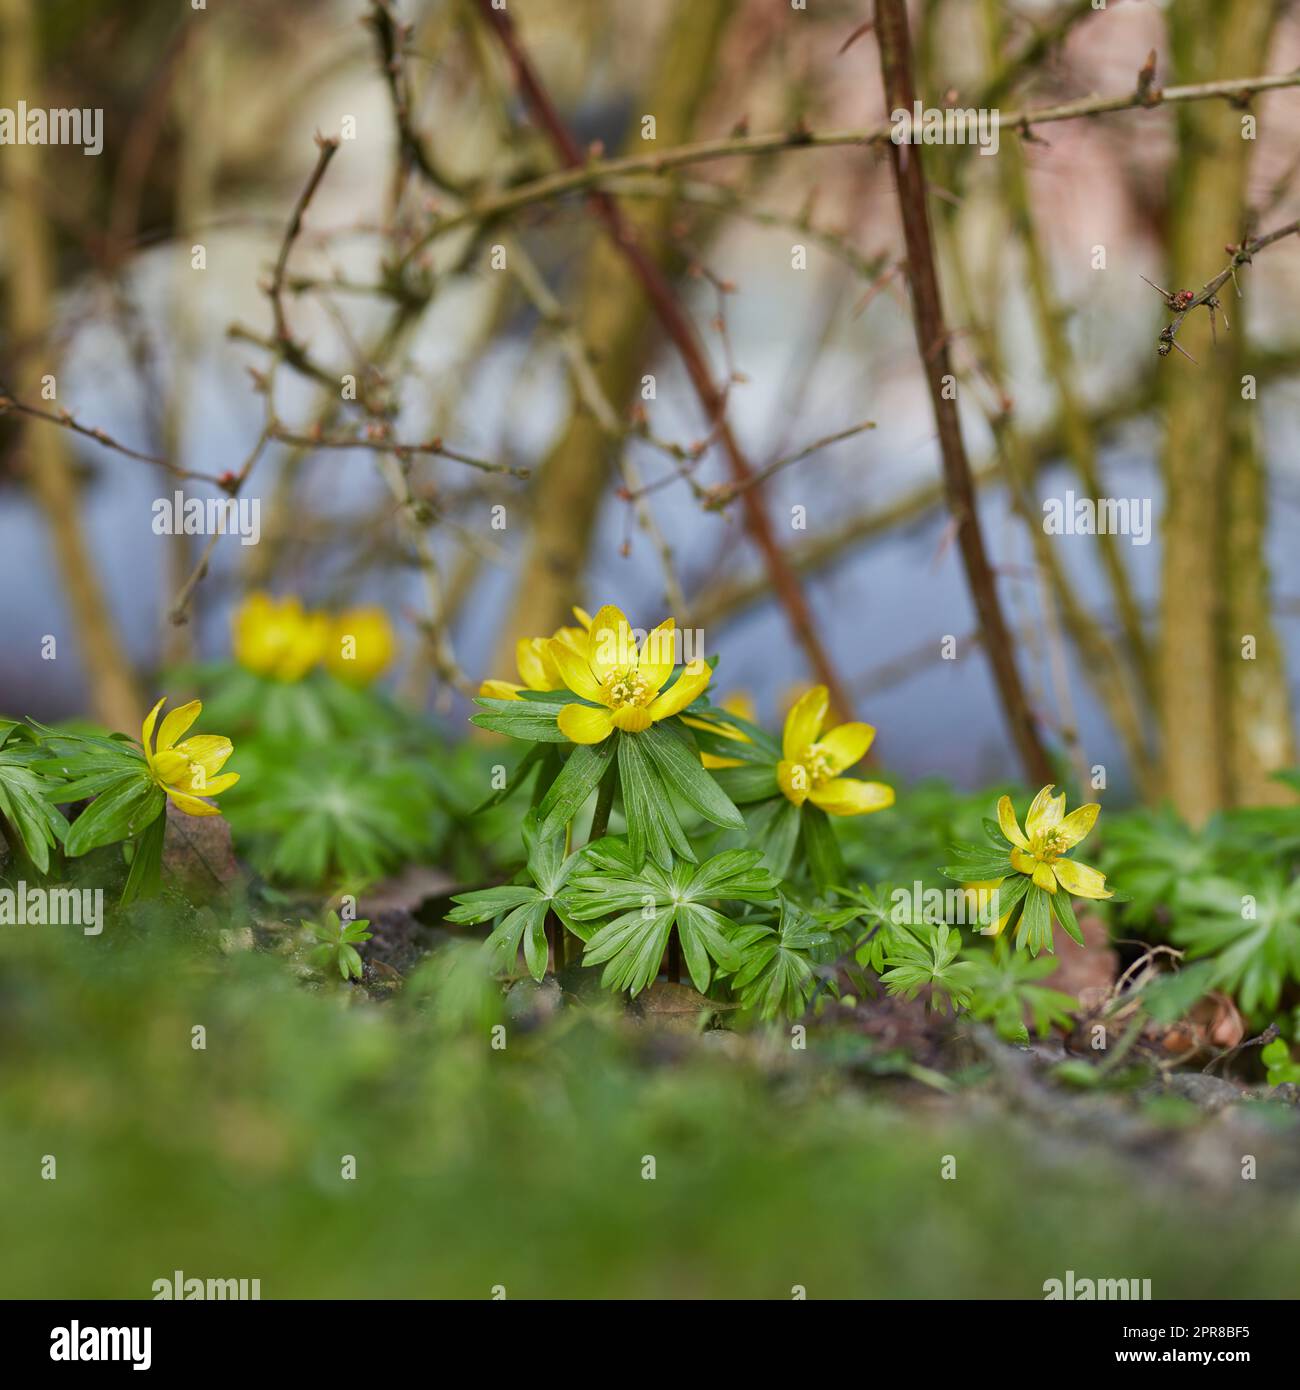 Decorative gardening of Winter Aconite or buttercup flowering plants with thorn twigs in a green backyard. Yellow flowers blooming in spring garden. Vibrant perennial flower heads thriving in nature Stock Photo